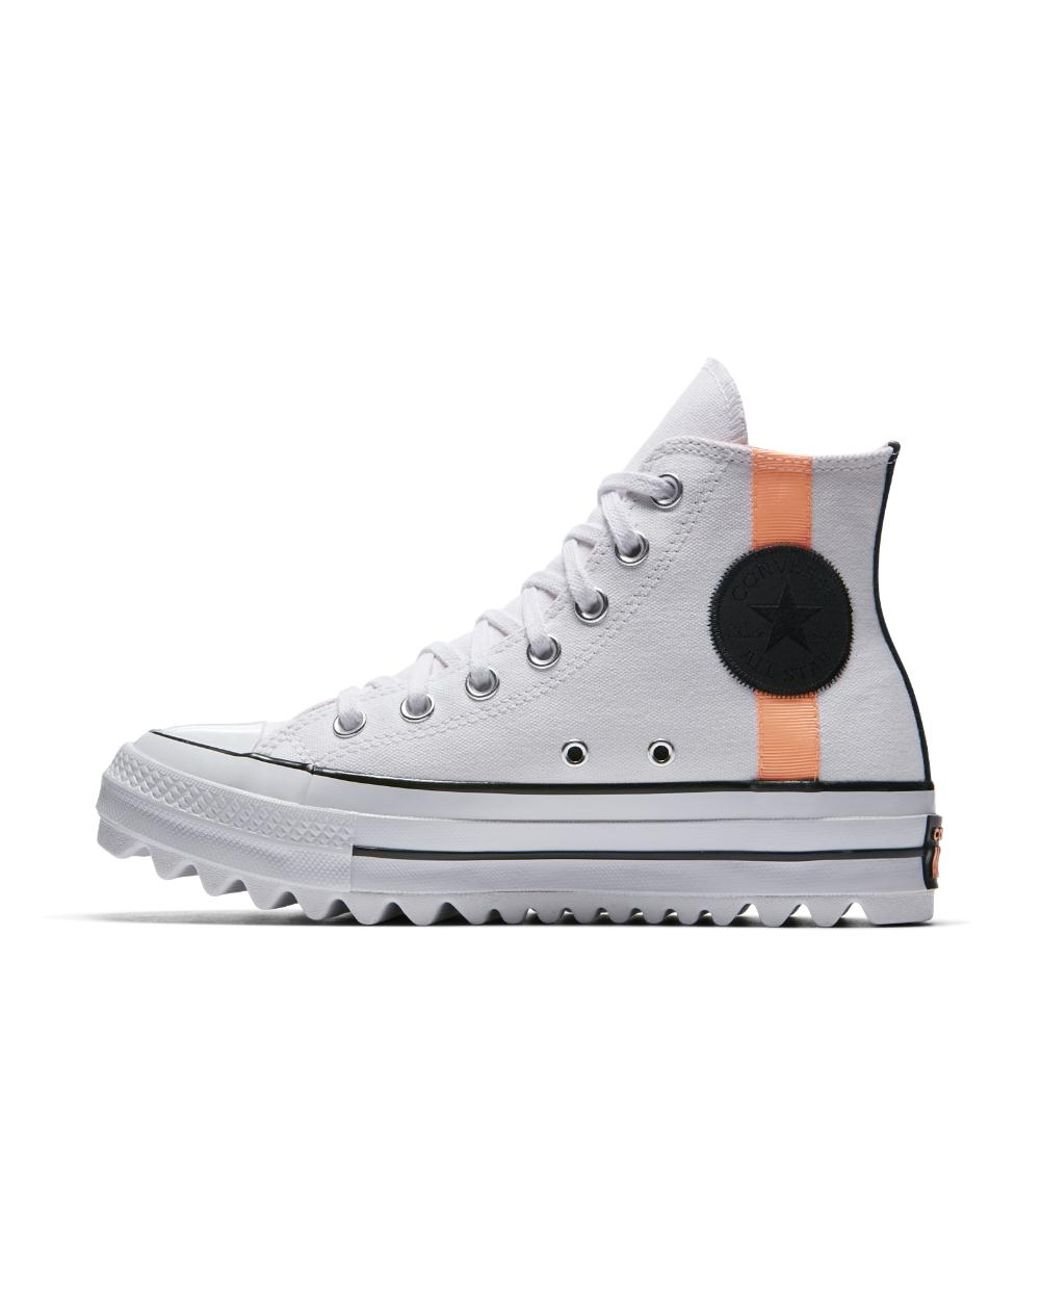 Converse Chuck Taylor All Star Lift Ripple High Top Women's Shoe in White |  Lyst